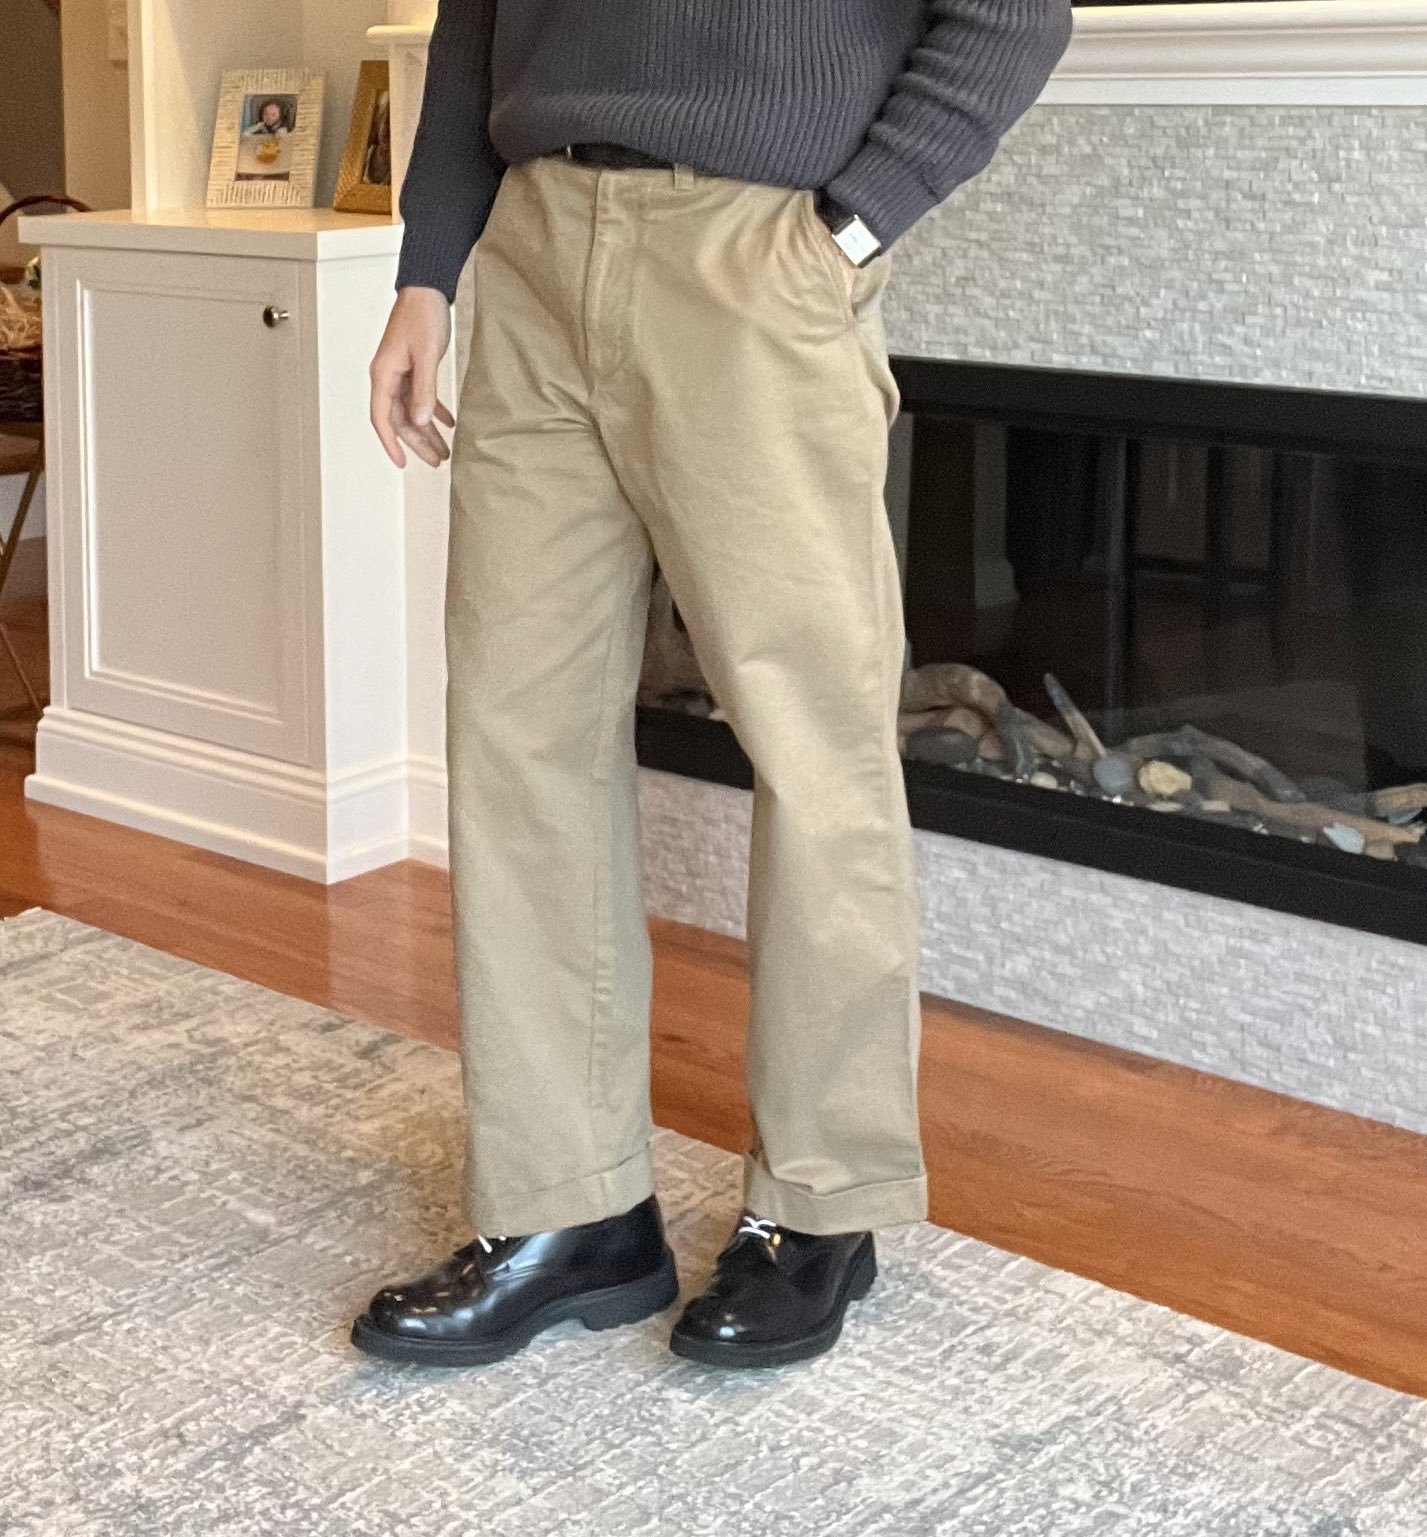 Jake Woolf on X: "I finally got J.Crew's giant fit chinos so here's my  review https://t.co/okuCIR1vQG https://t.co/qfkatzc3Bz" / X